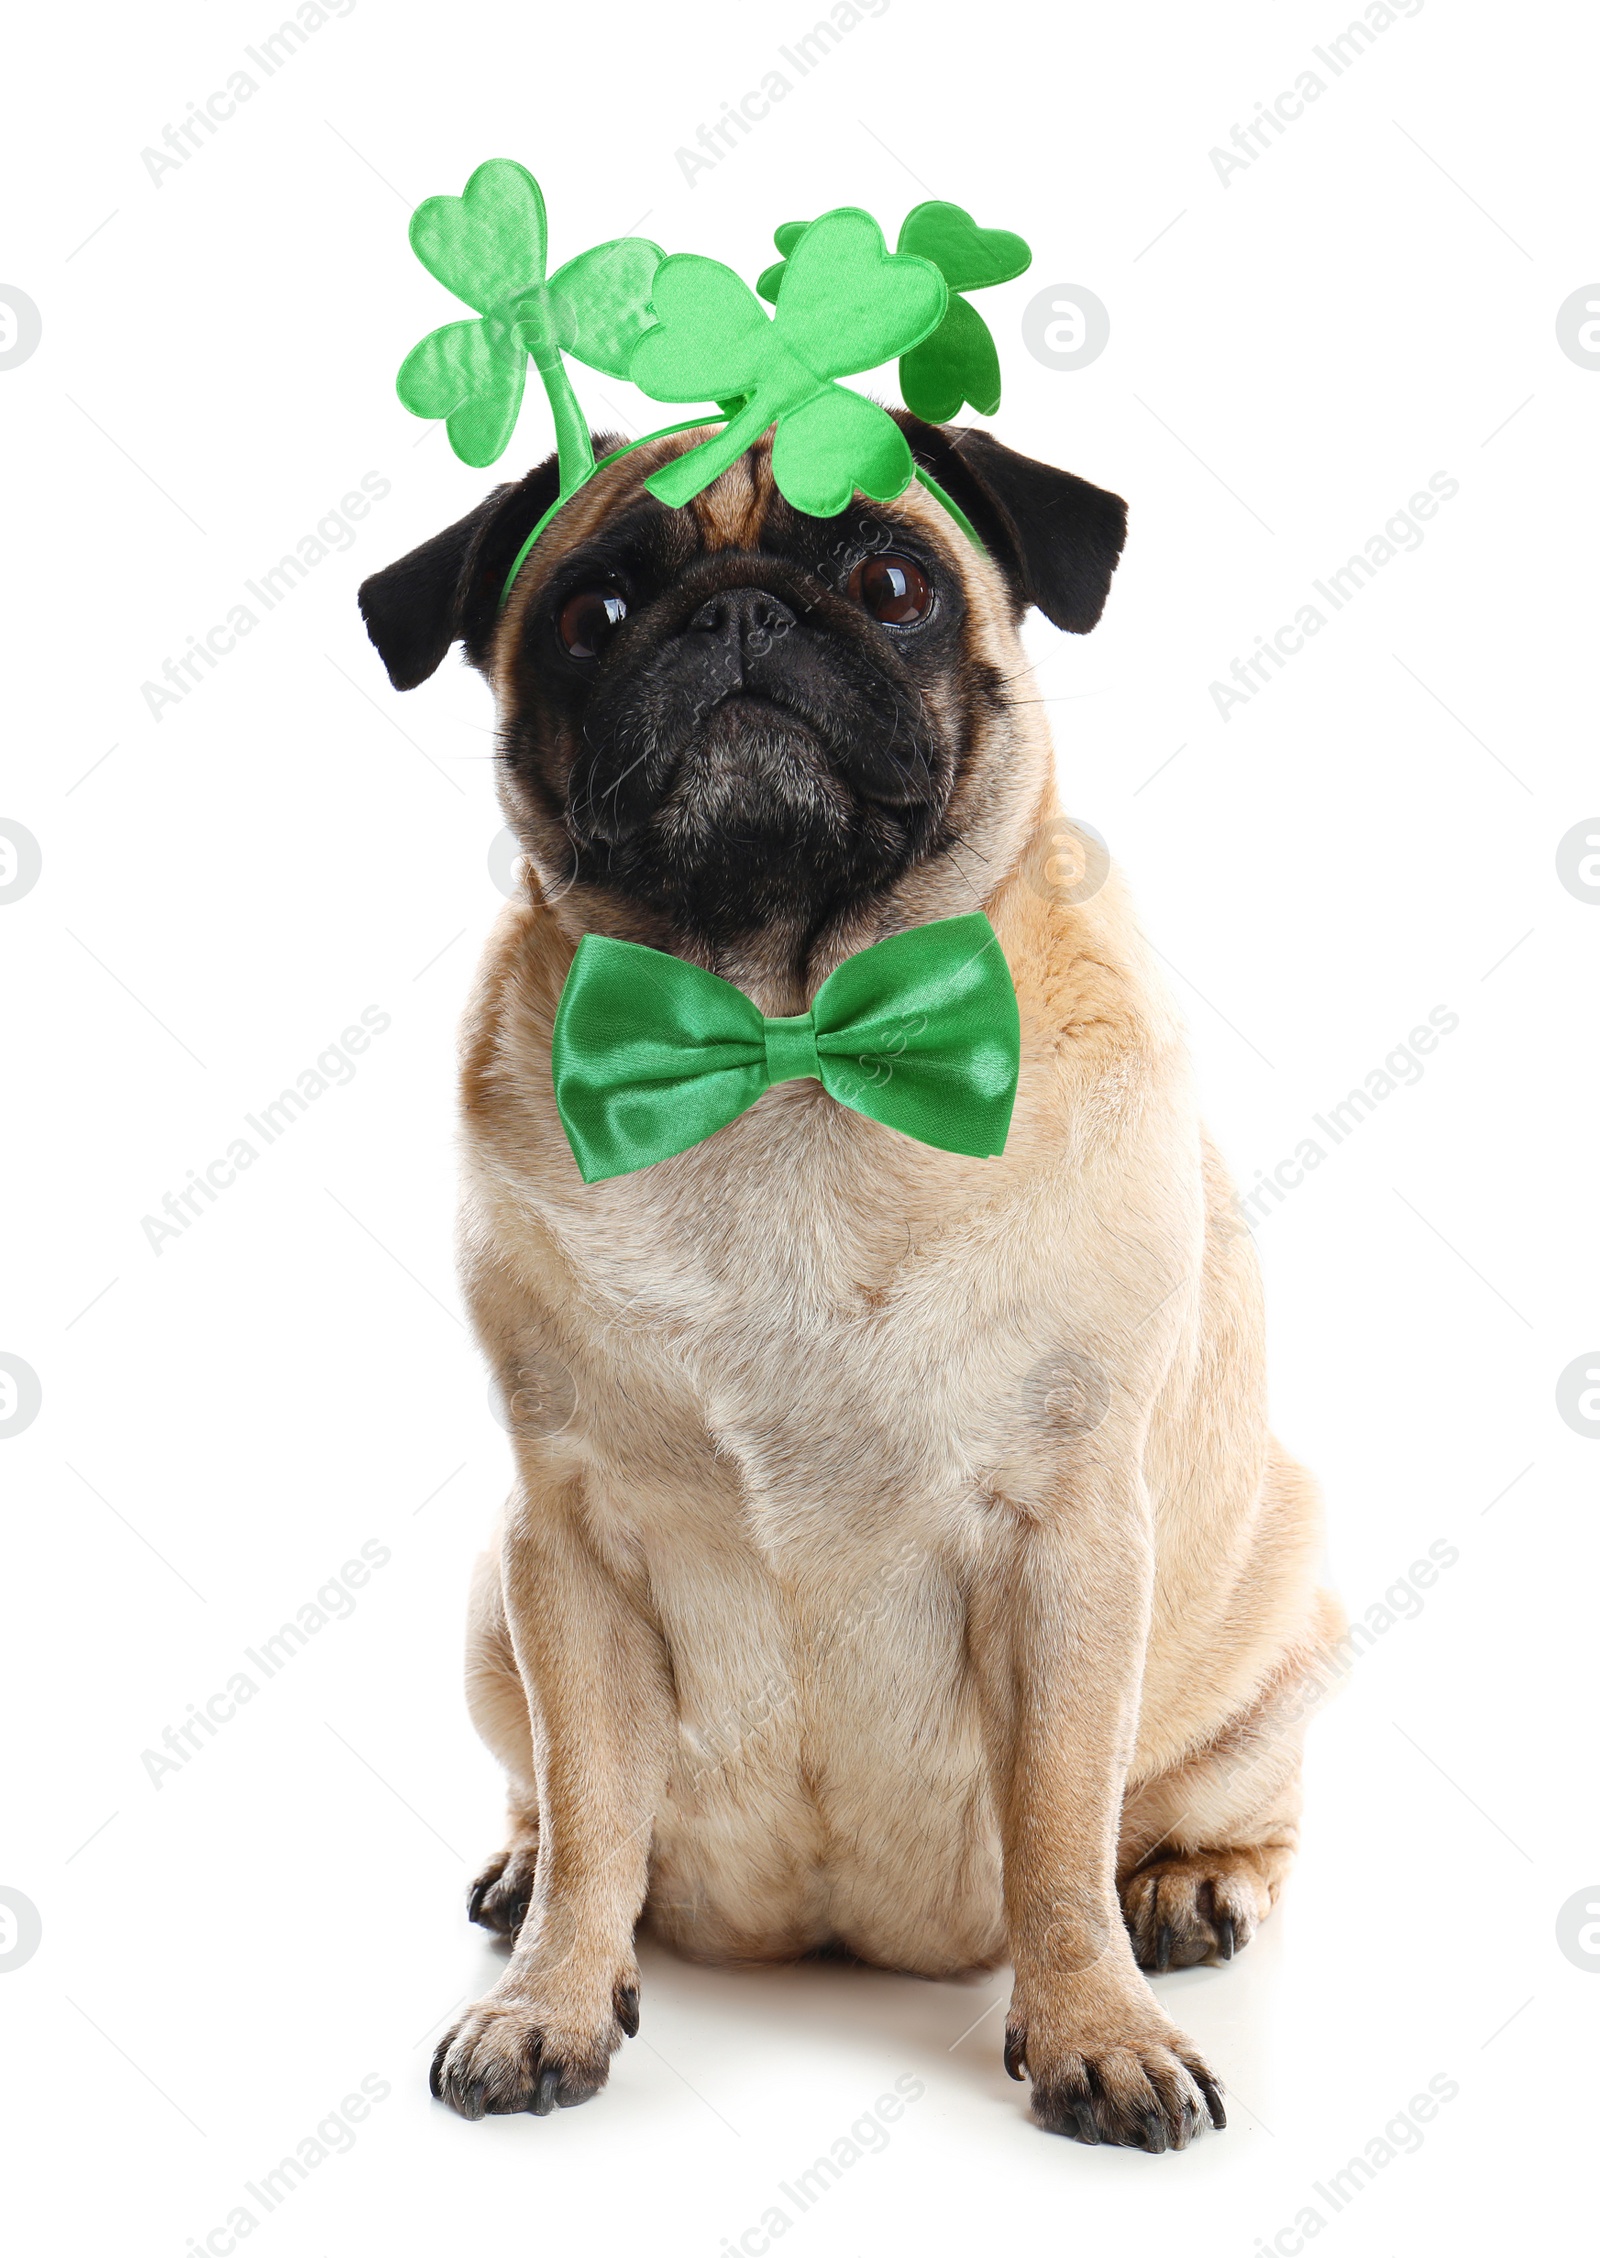 Image of Cute pug dog with clover headband and bow tie on white background. St. Patrick's Day